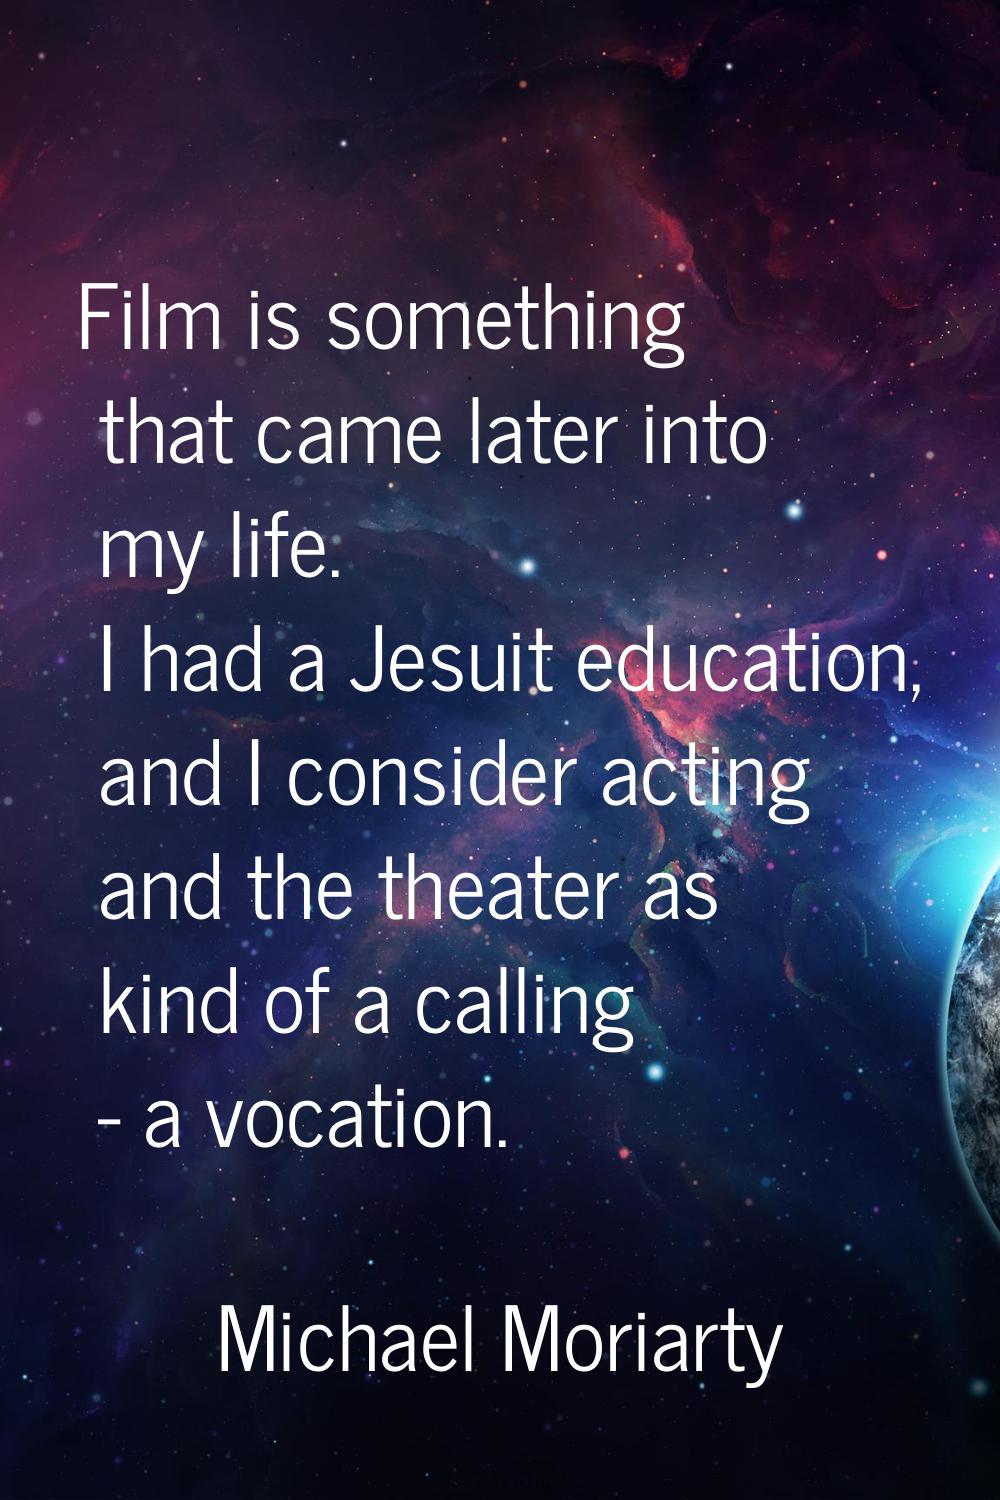 Film is something that came later into my life. I had a Jesuit education, and I consider acting and